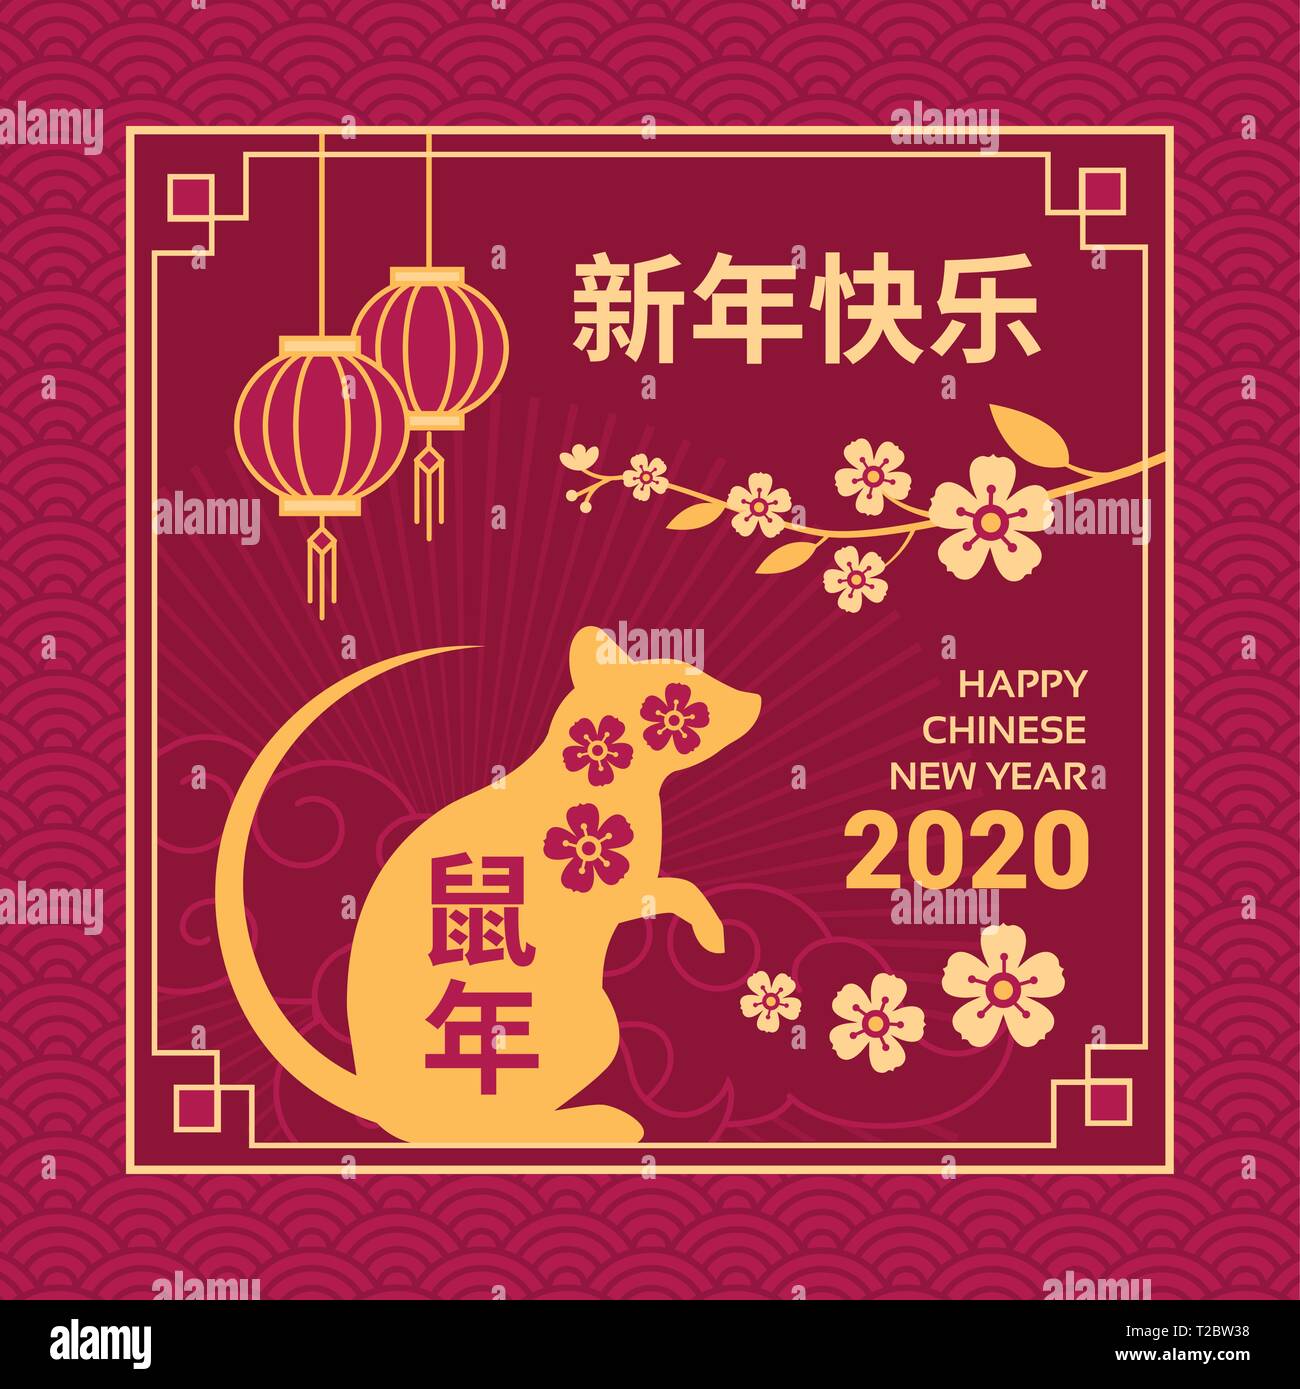 Happy Chinese New Year card and social media post with rat, blossom flowers and red lanterns Stock Vector